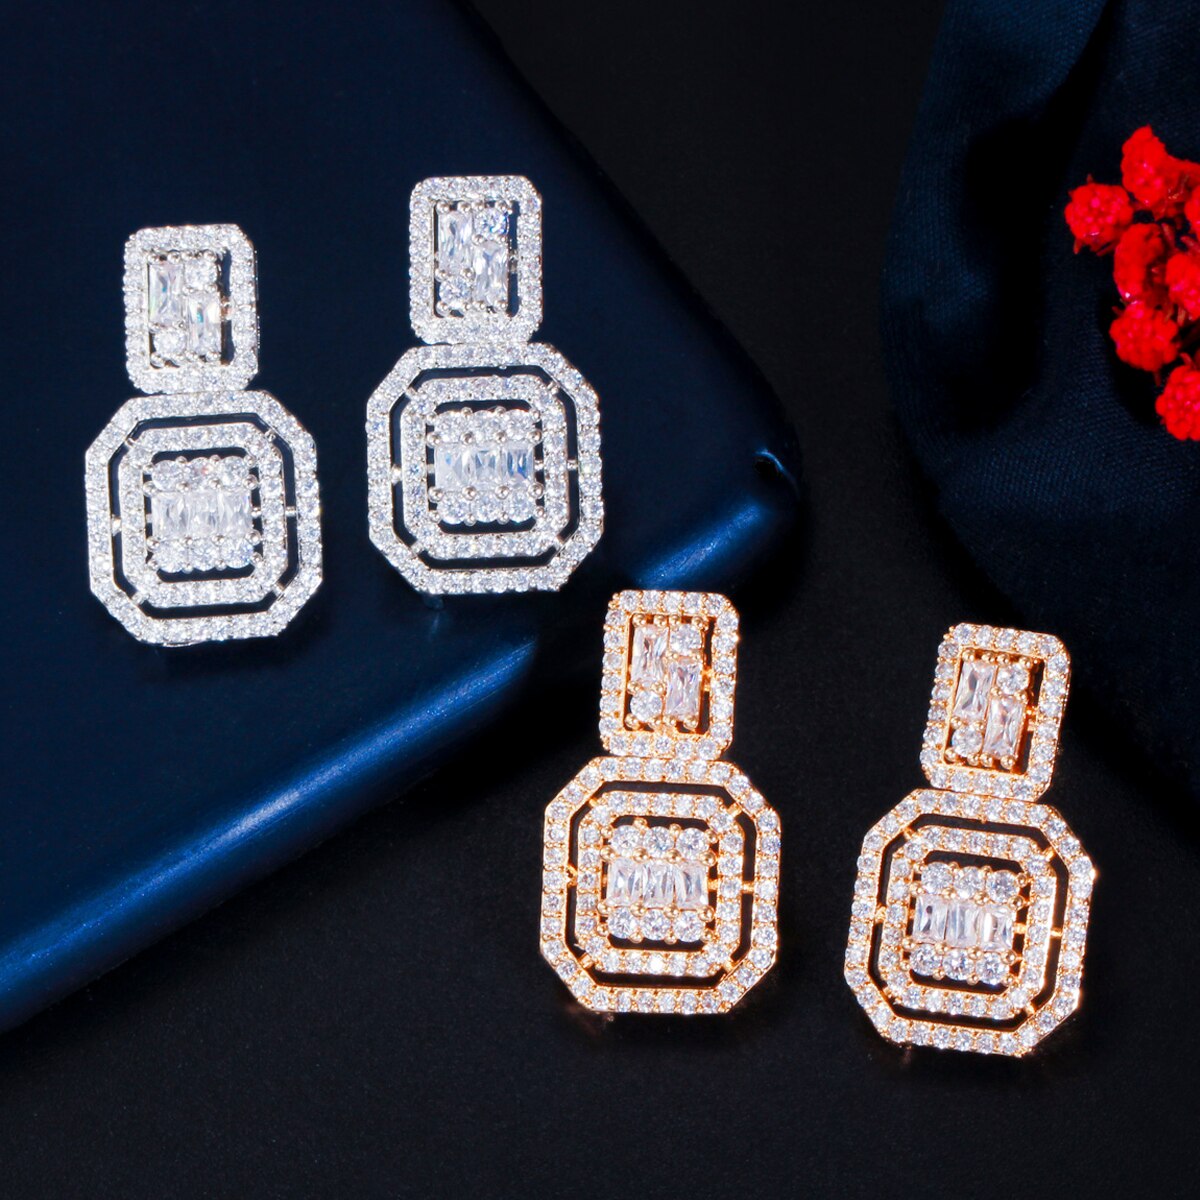 ThreeGraces-Elegant-Bridal-Wedding-Square-Necklace-Earrings-Sets-White-CZ-Crystal-Silver-Color-India-1005001616553168-8